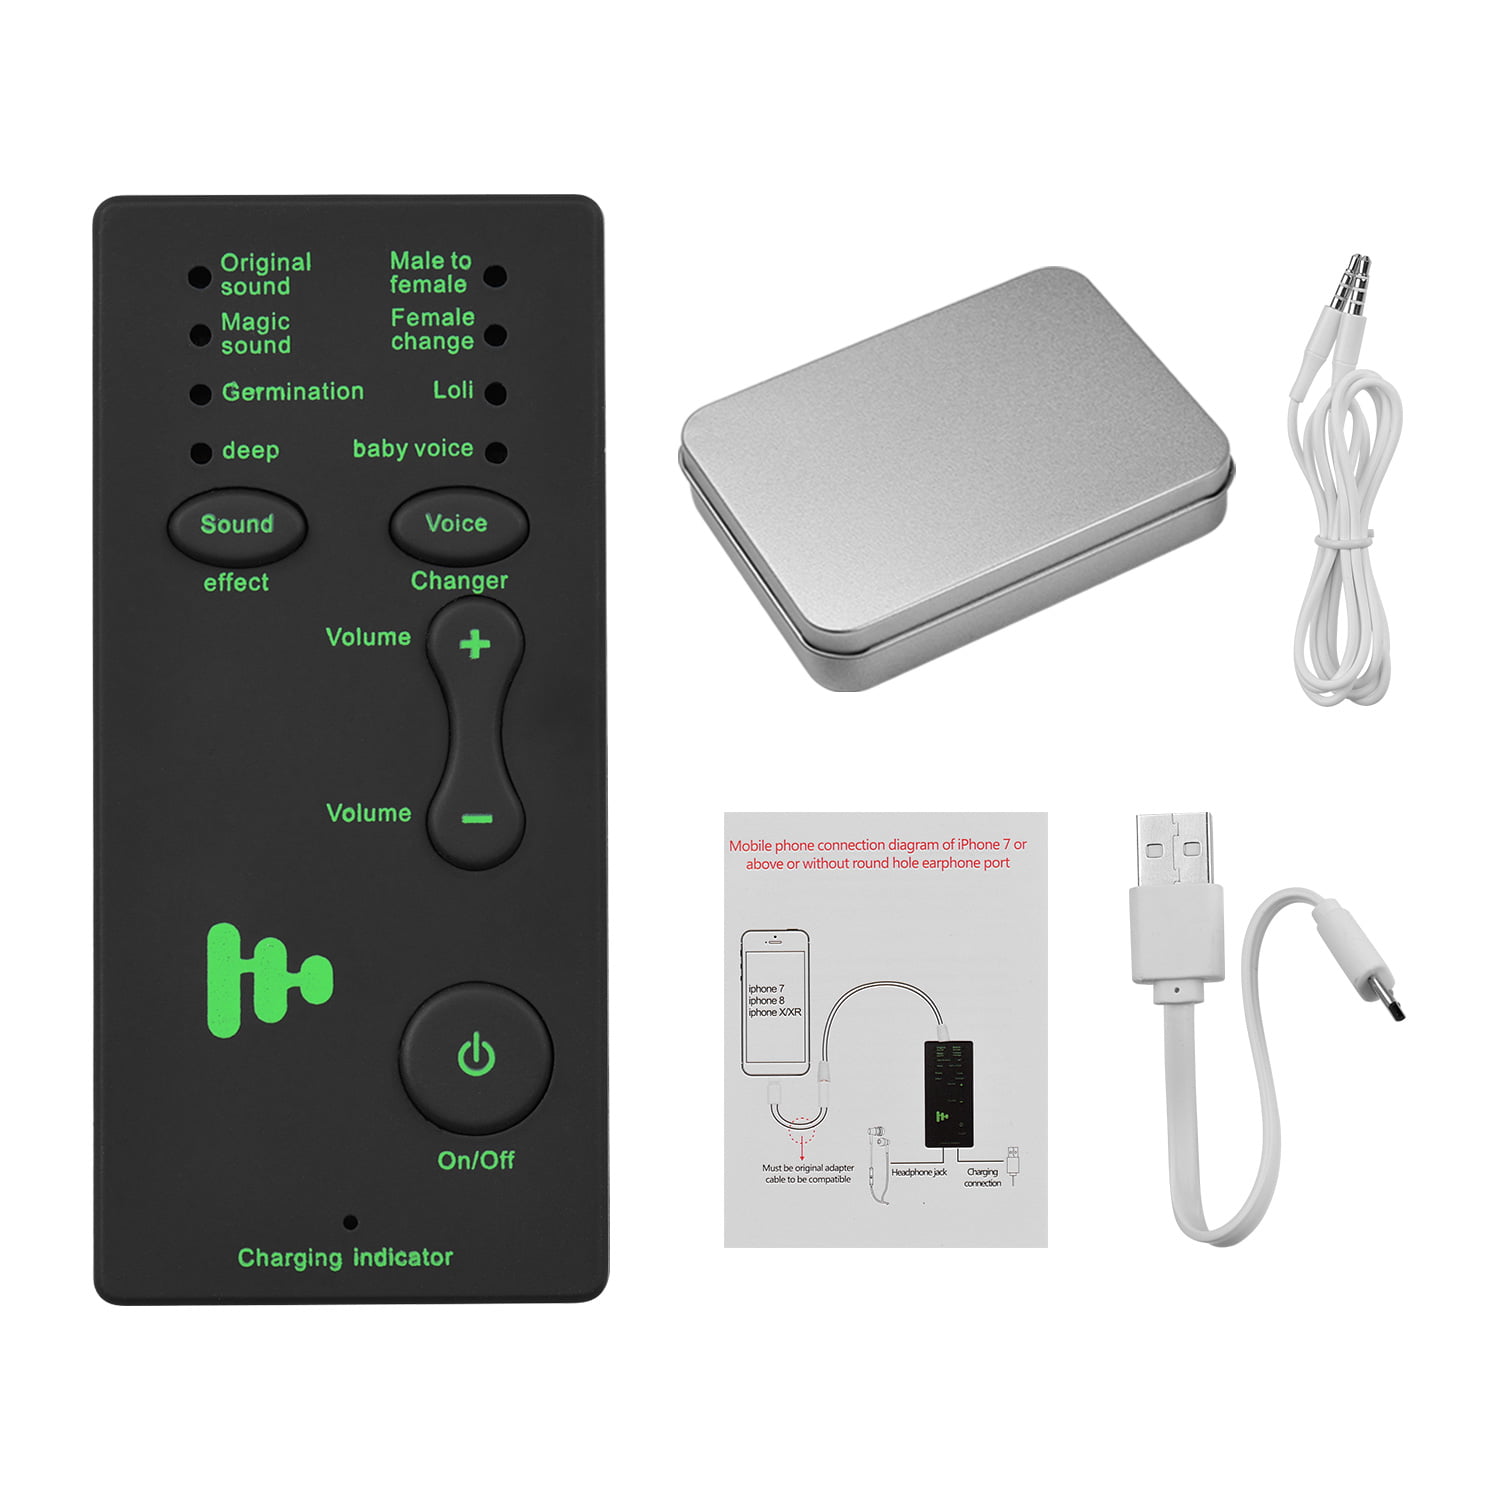 The Best Portable Digital Wireless Voice Changer Synthesizer Machine Device Kit 